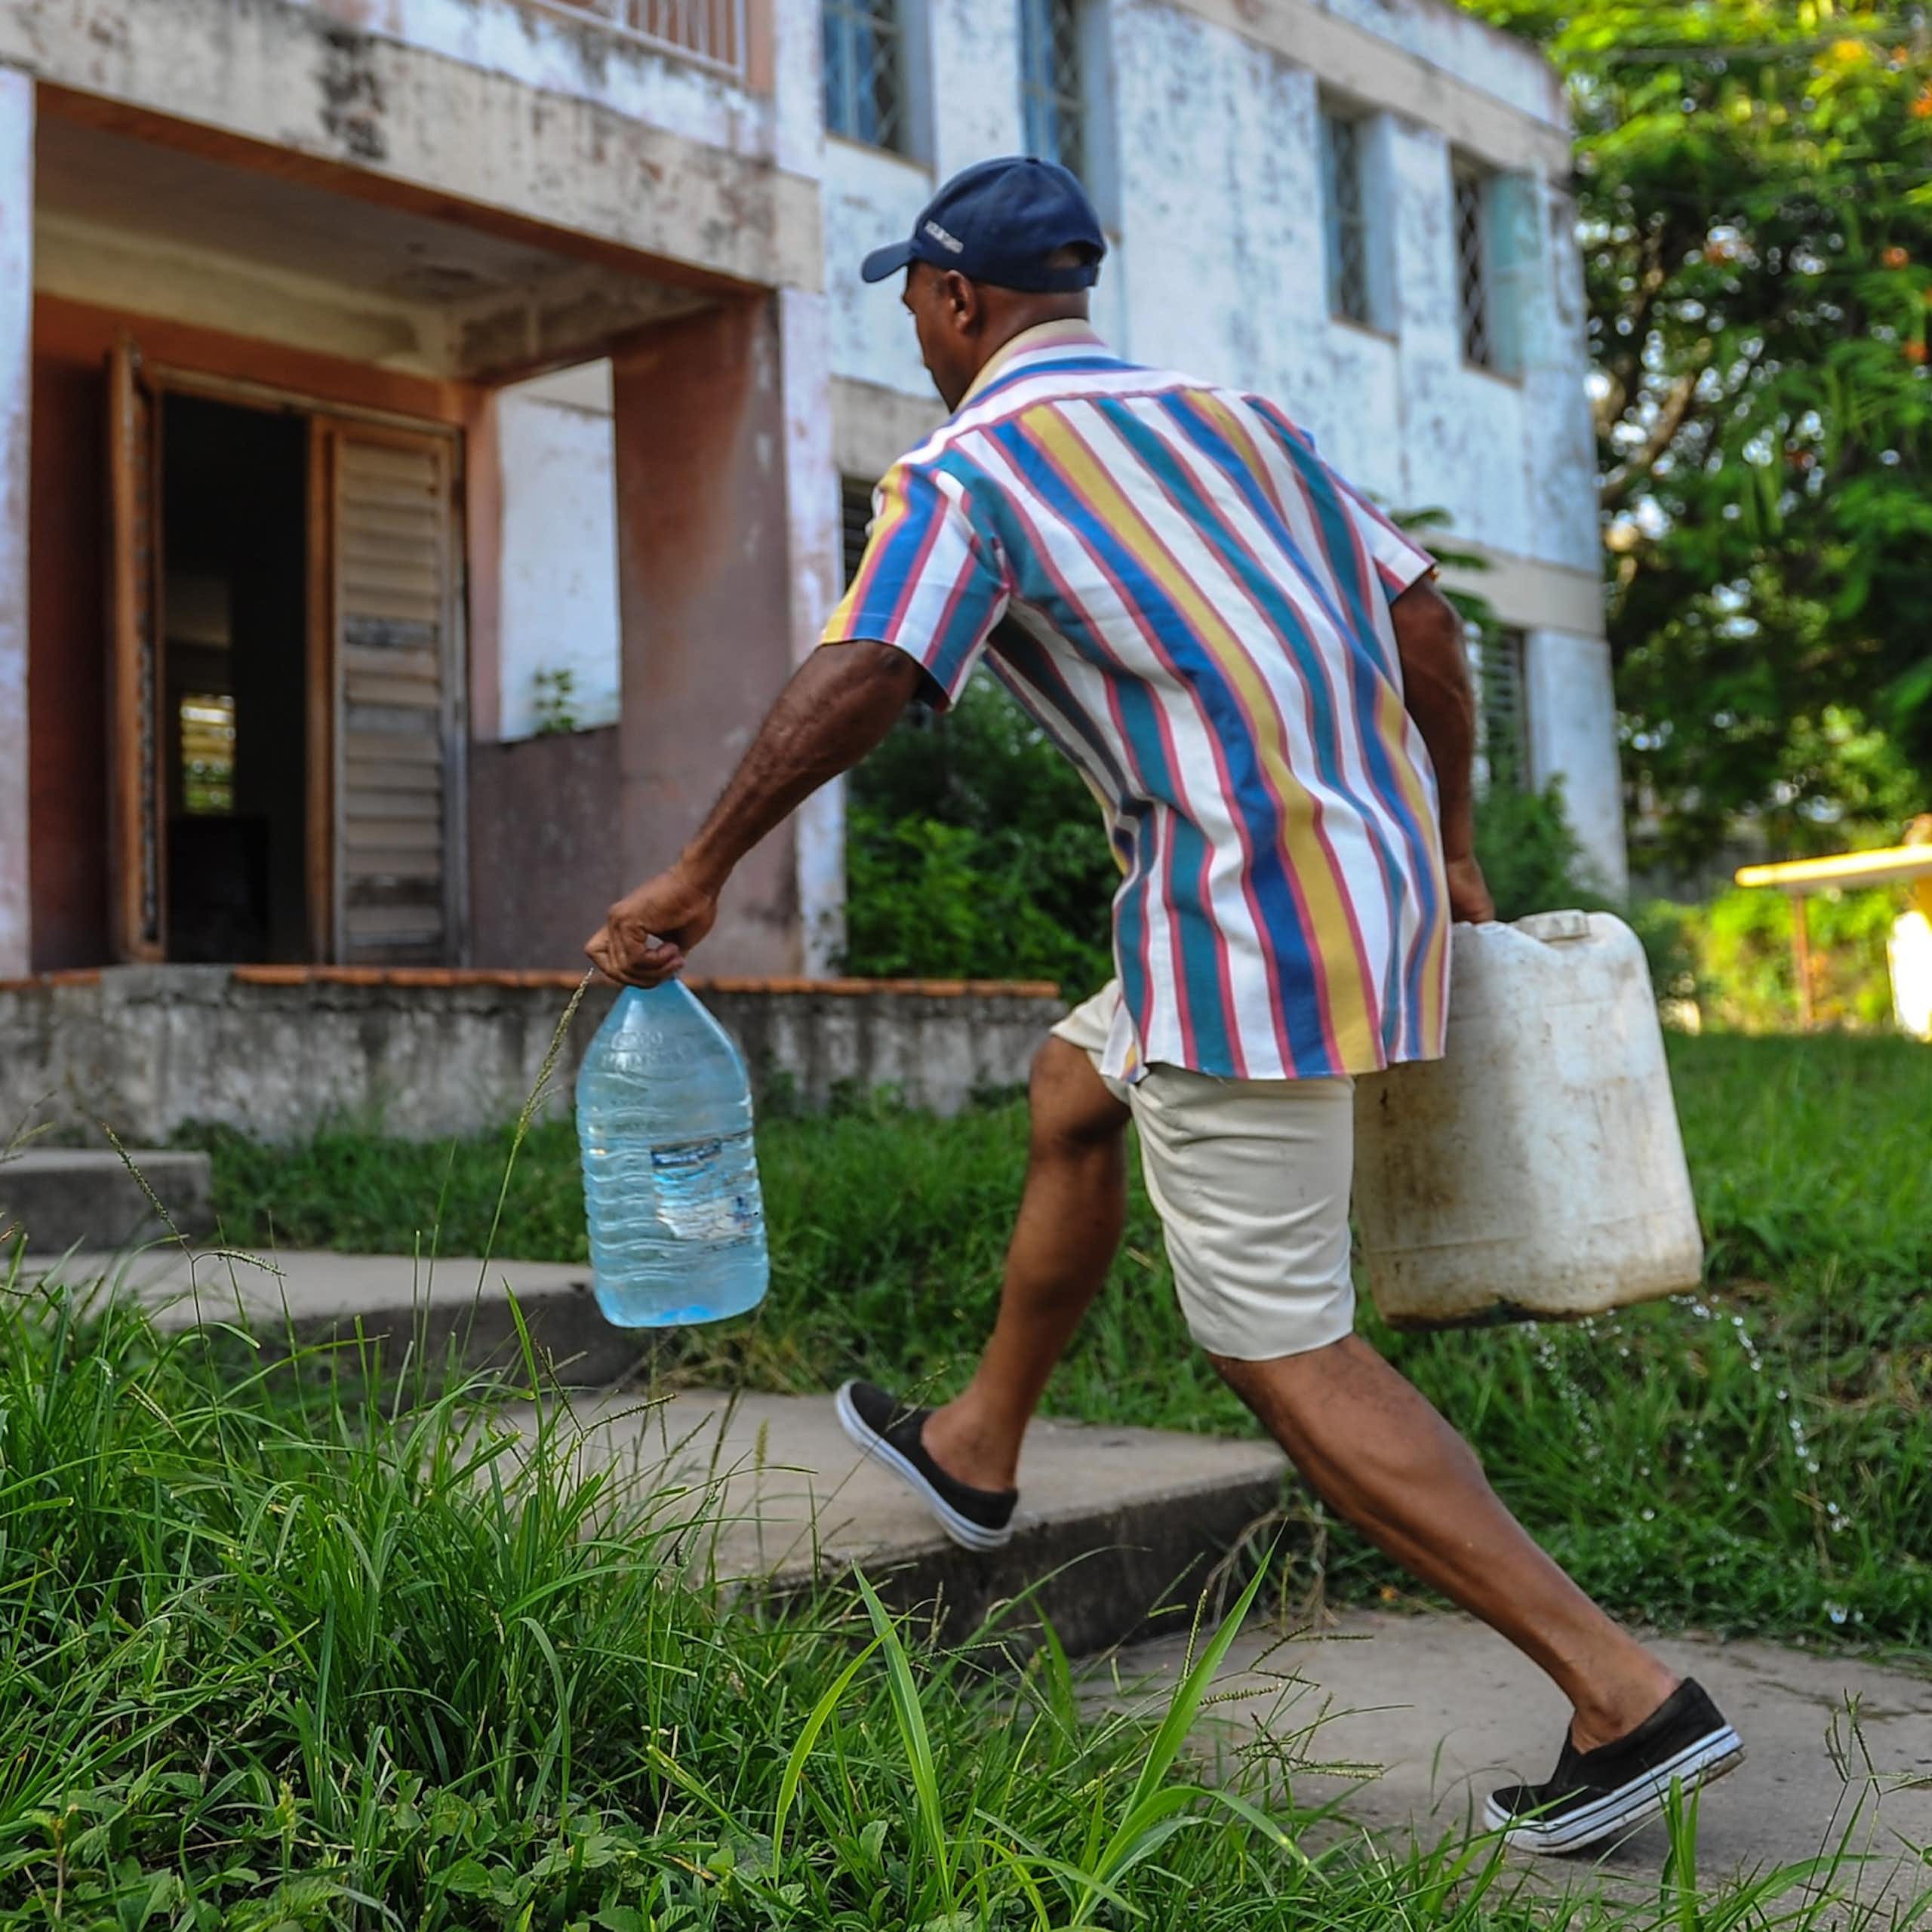 A man carries two large jugs of water to an apartment building.